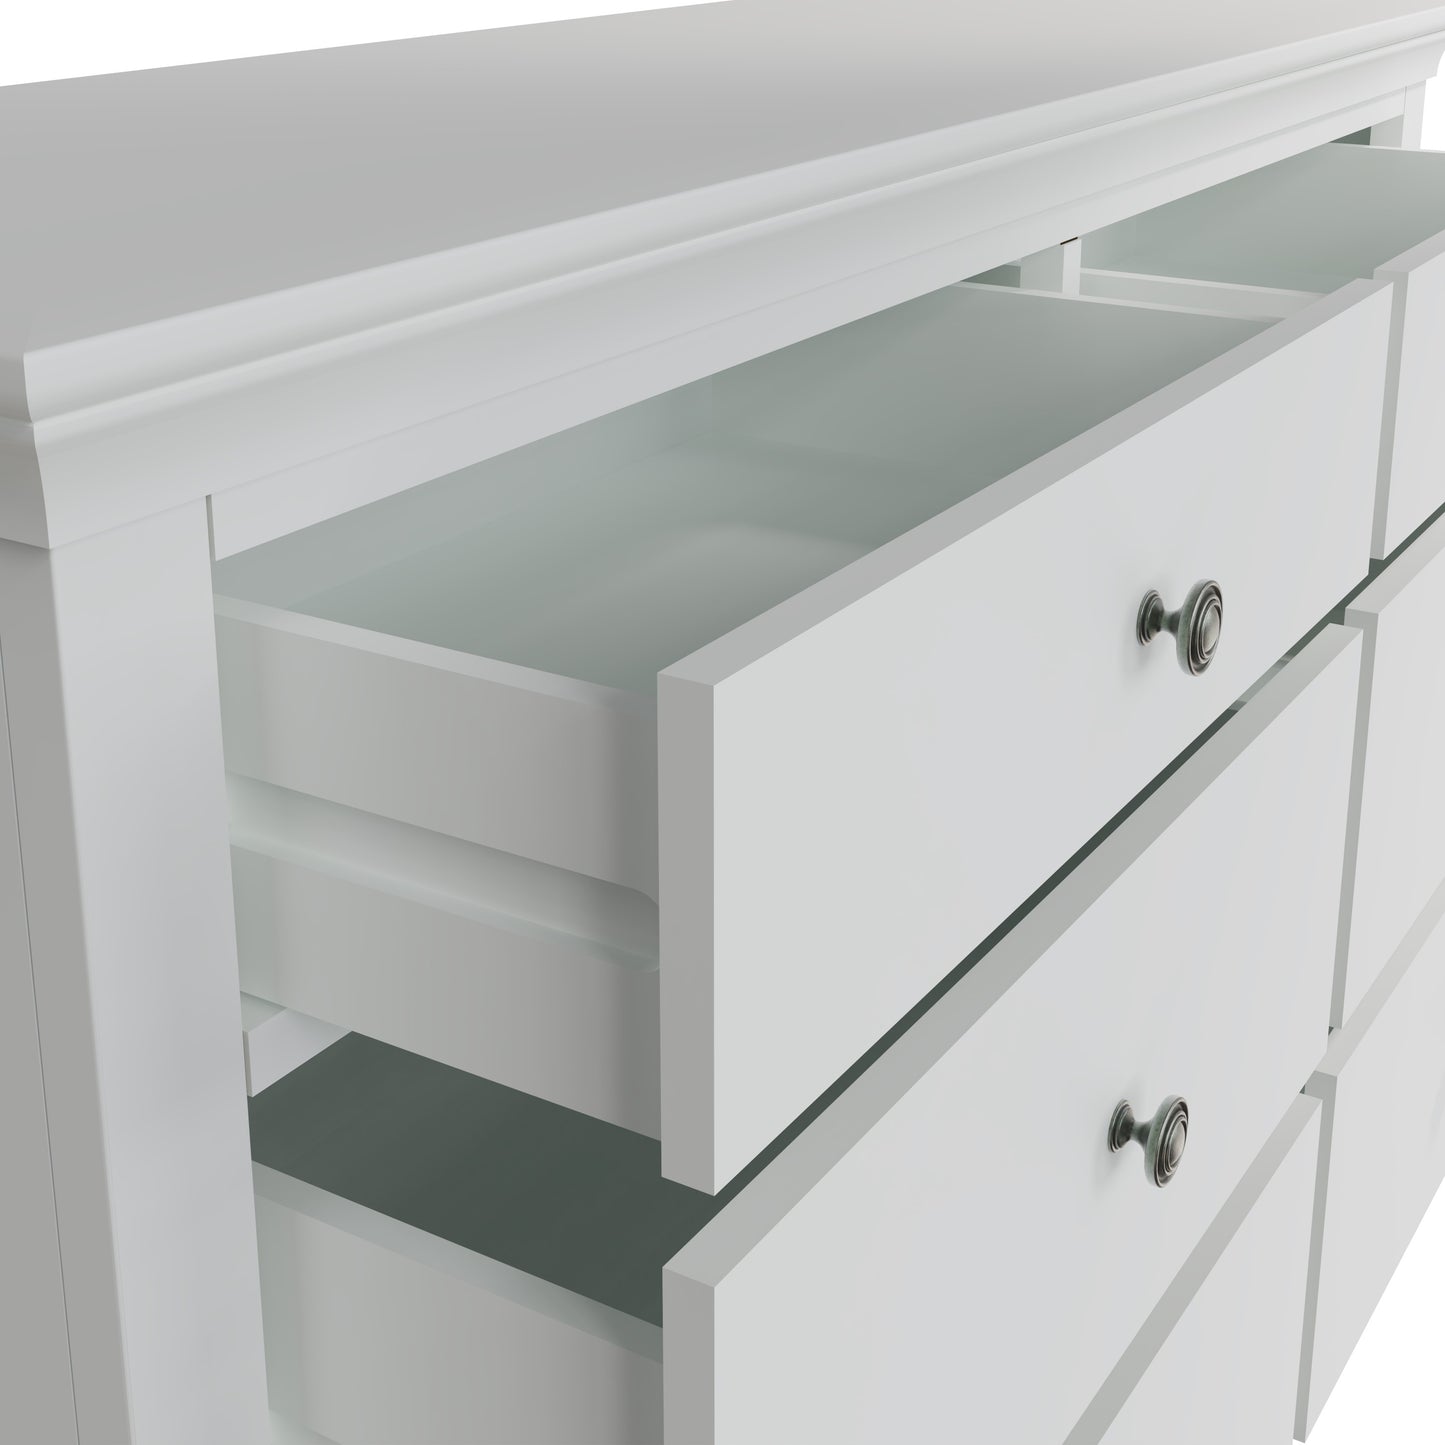 Toulouse White Chest Of Drawers - 6 Drawer Chest